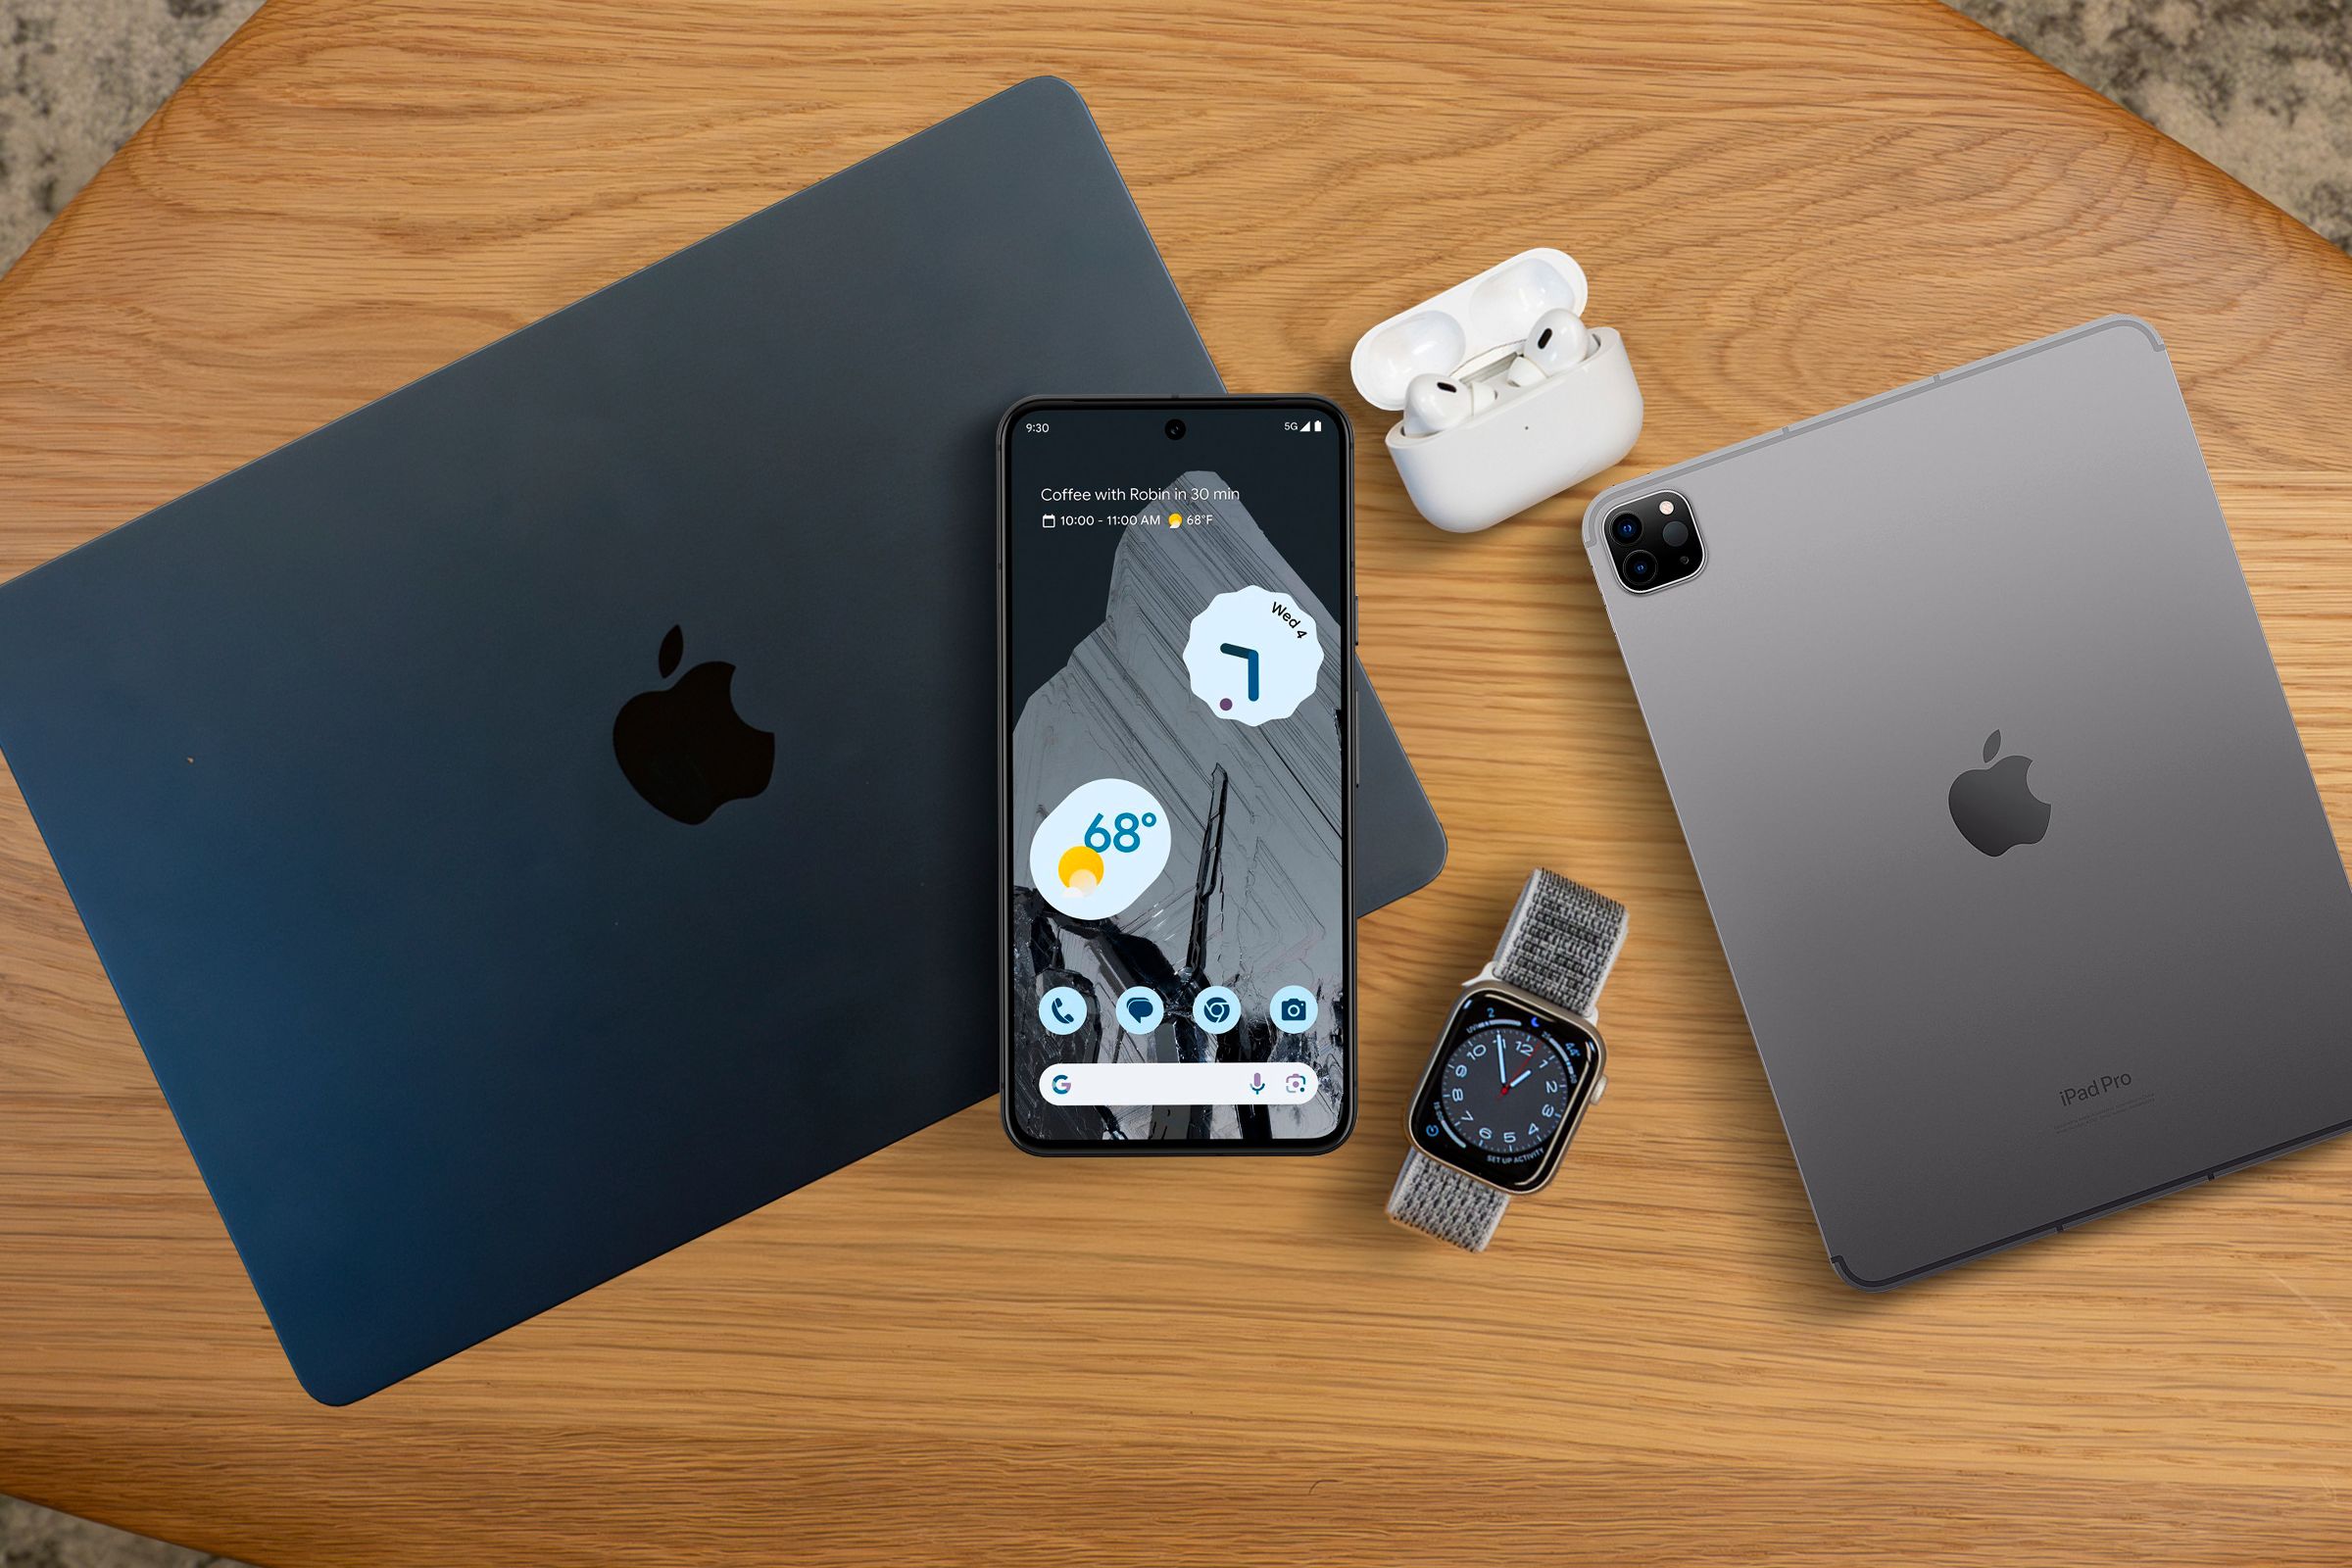 A Macbook, oPad, Airpods, Apple Watch and an Android phone in the center, above the Macbook.